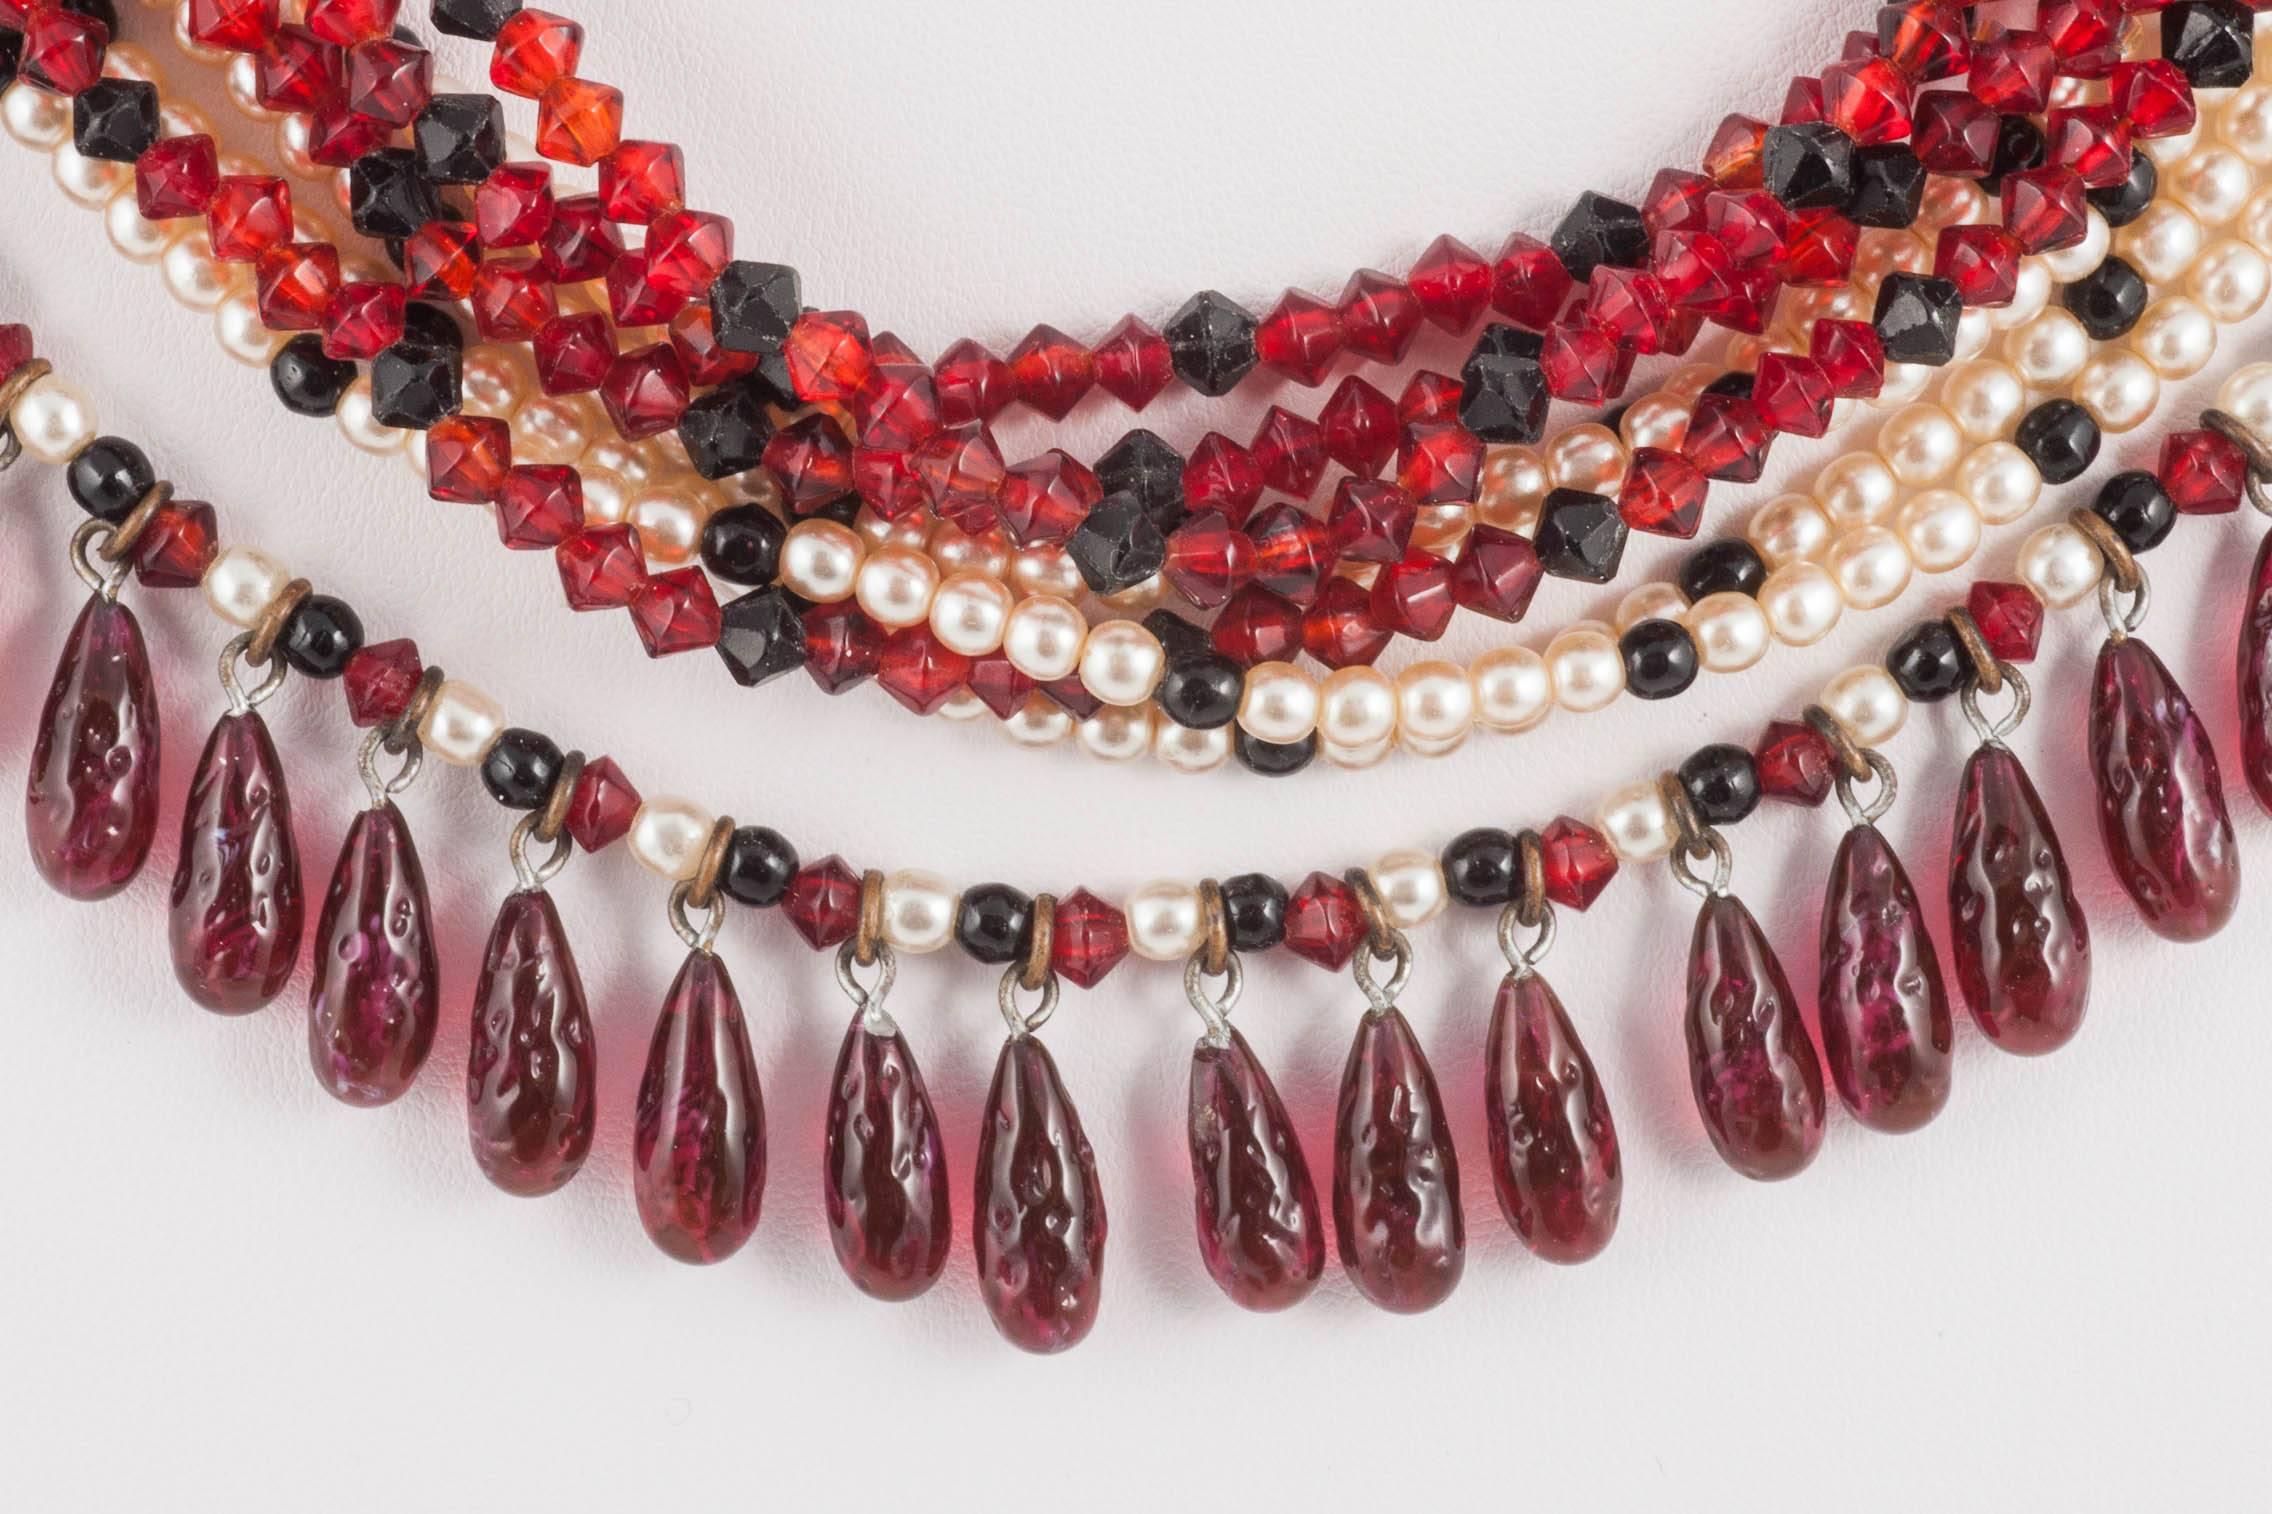 A sophisitcated multi row necklace made by Gripoix , attributed to Chanel, made from small ruby and black glass beads, small pearls, and fringed with tear shaped poured glass drops all round the outer side of the elegant necklace.
This necklace is